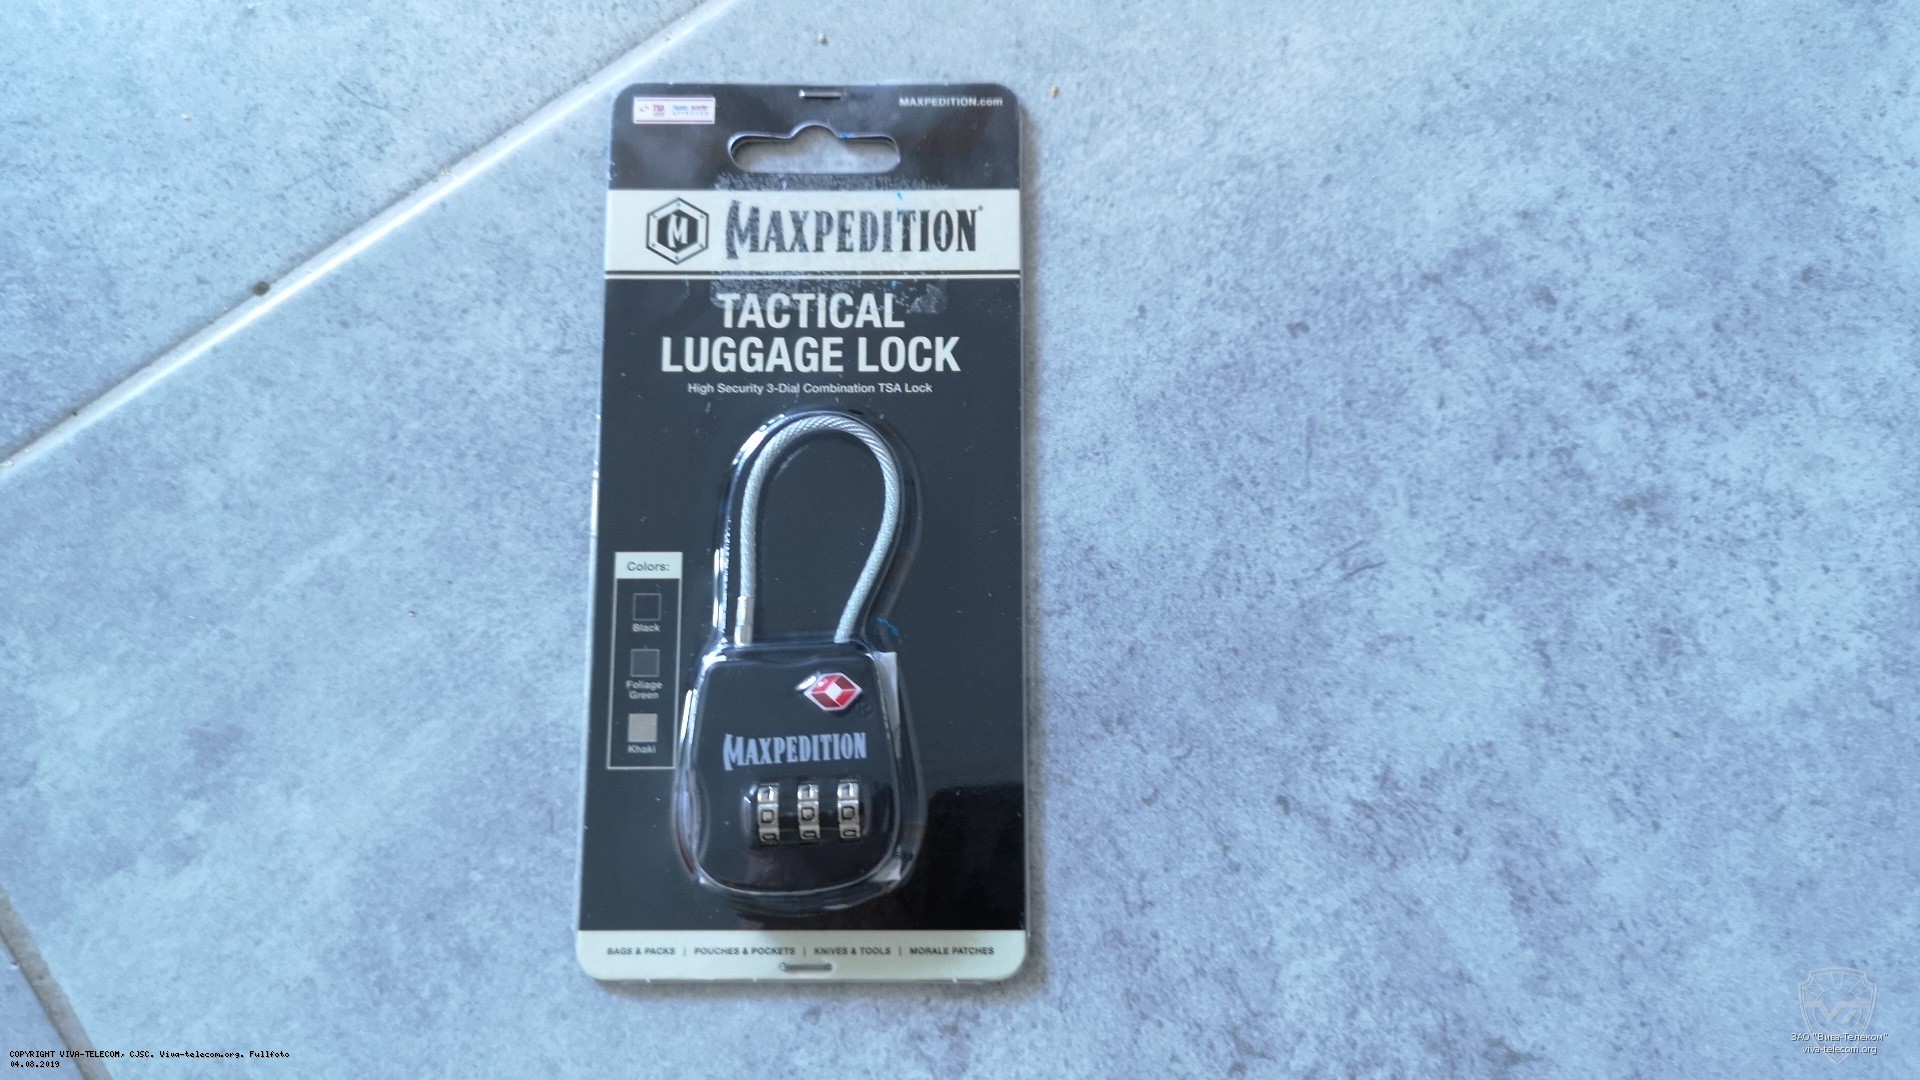  Maxpedition Tactical Luggage Lock